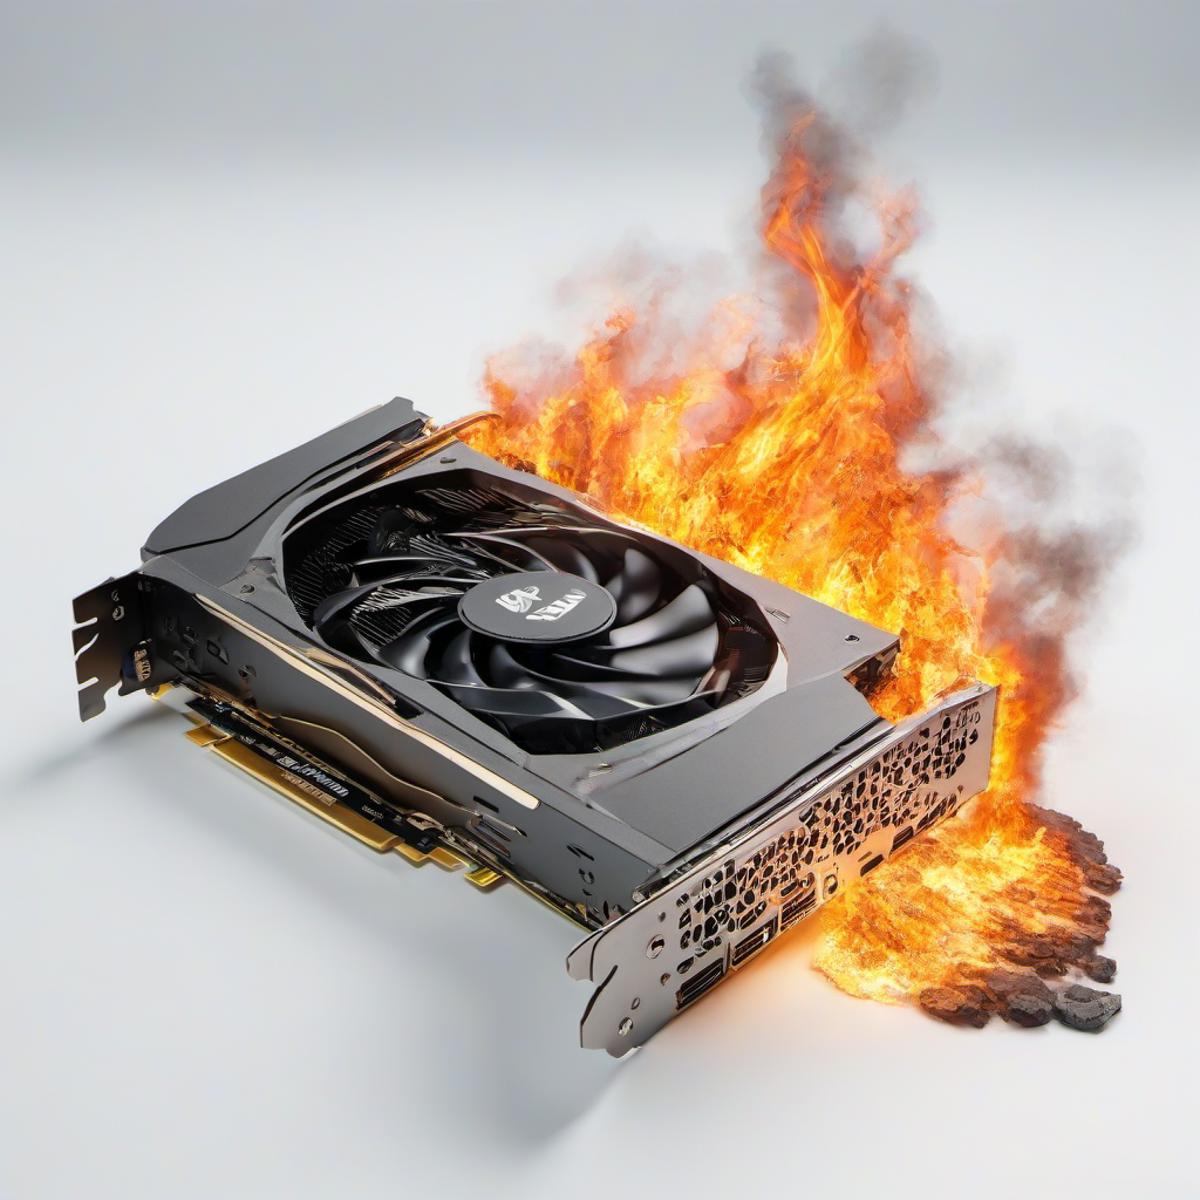 A computer fan on fire with a flame and smoke.